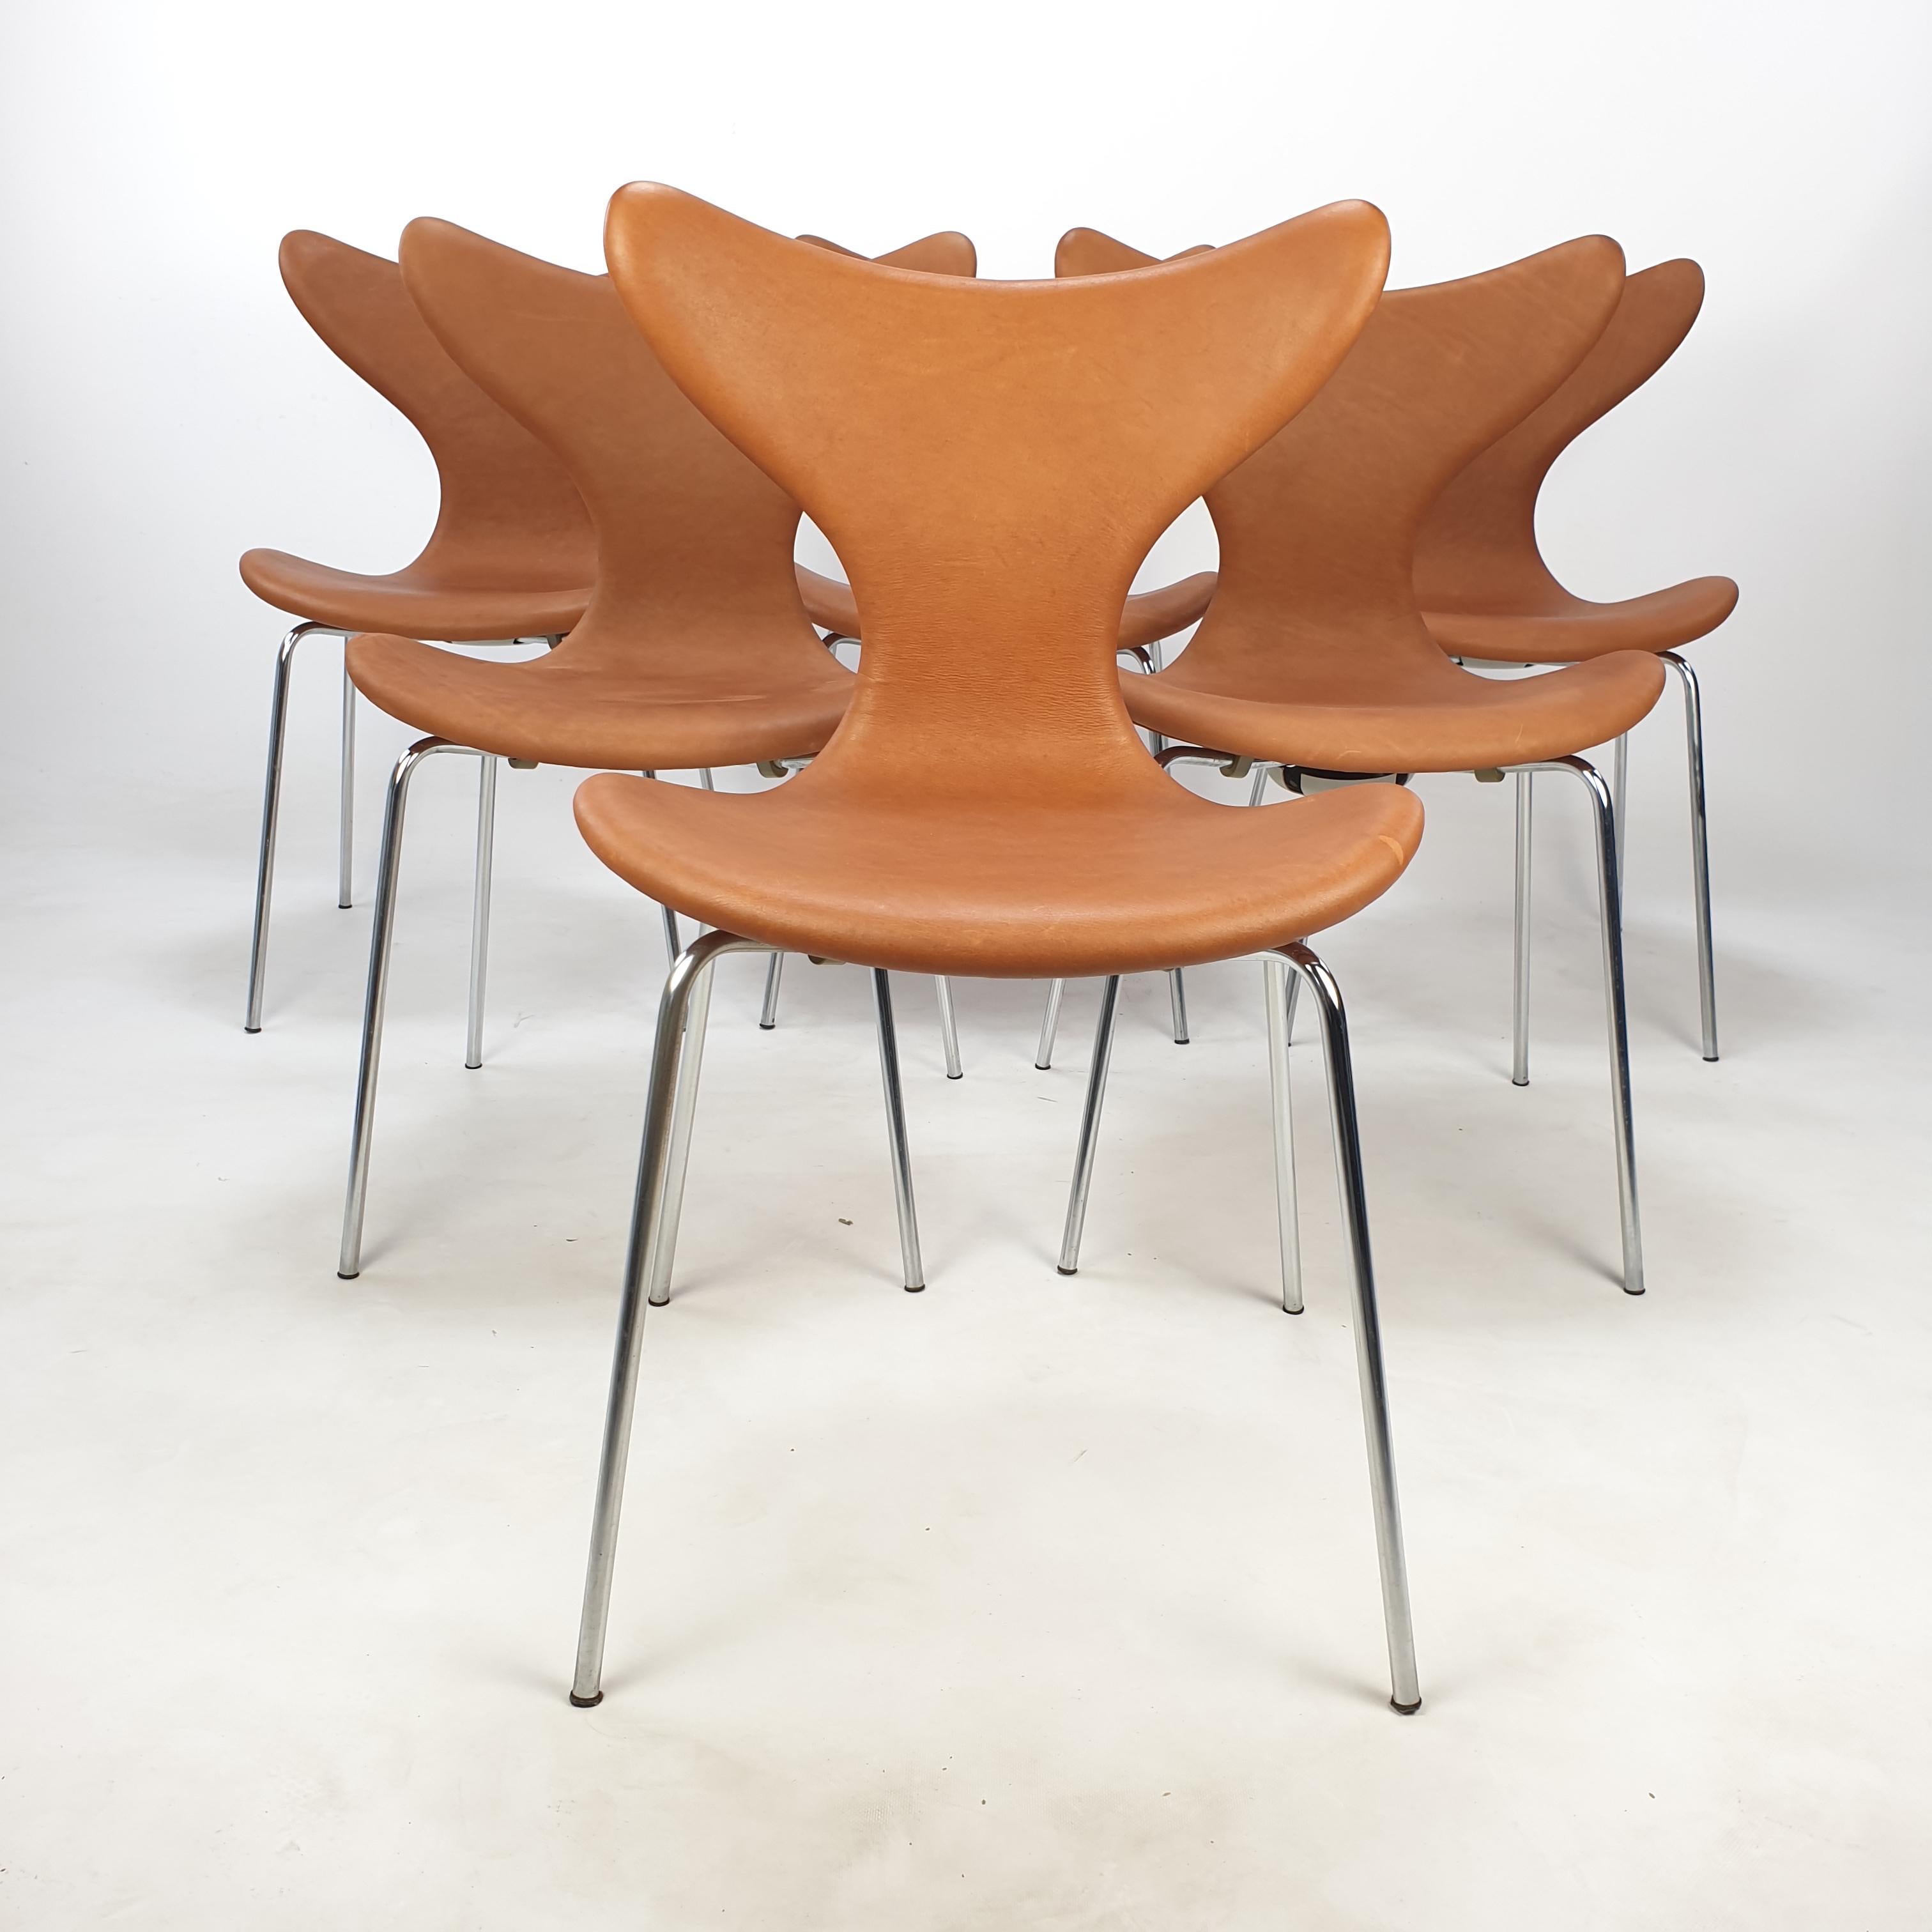 Danish Set of 6 Lily Chairs by Arne Jacobsen for Fritz Hansen, 1960s For Sale